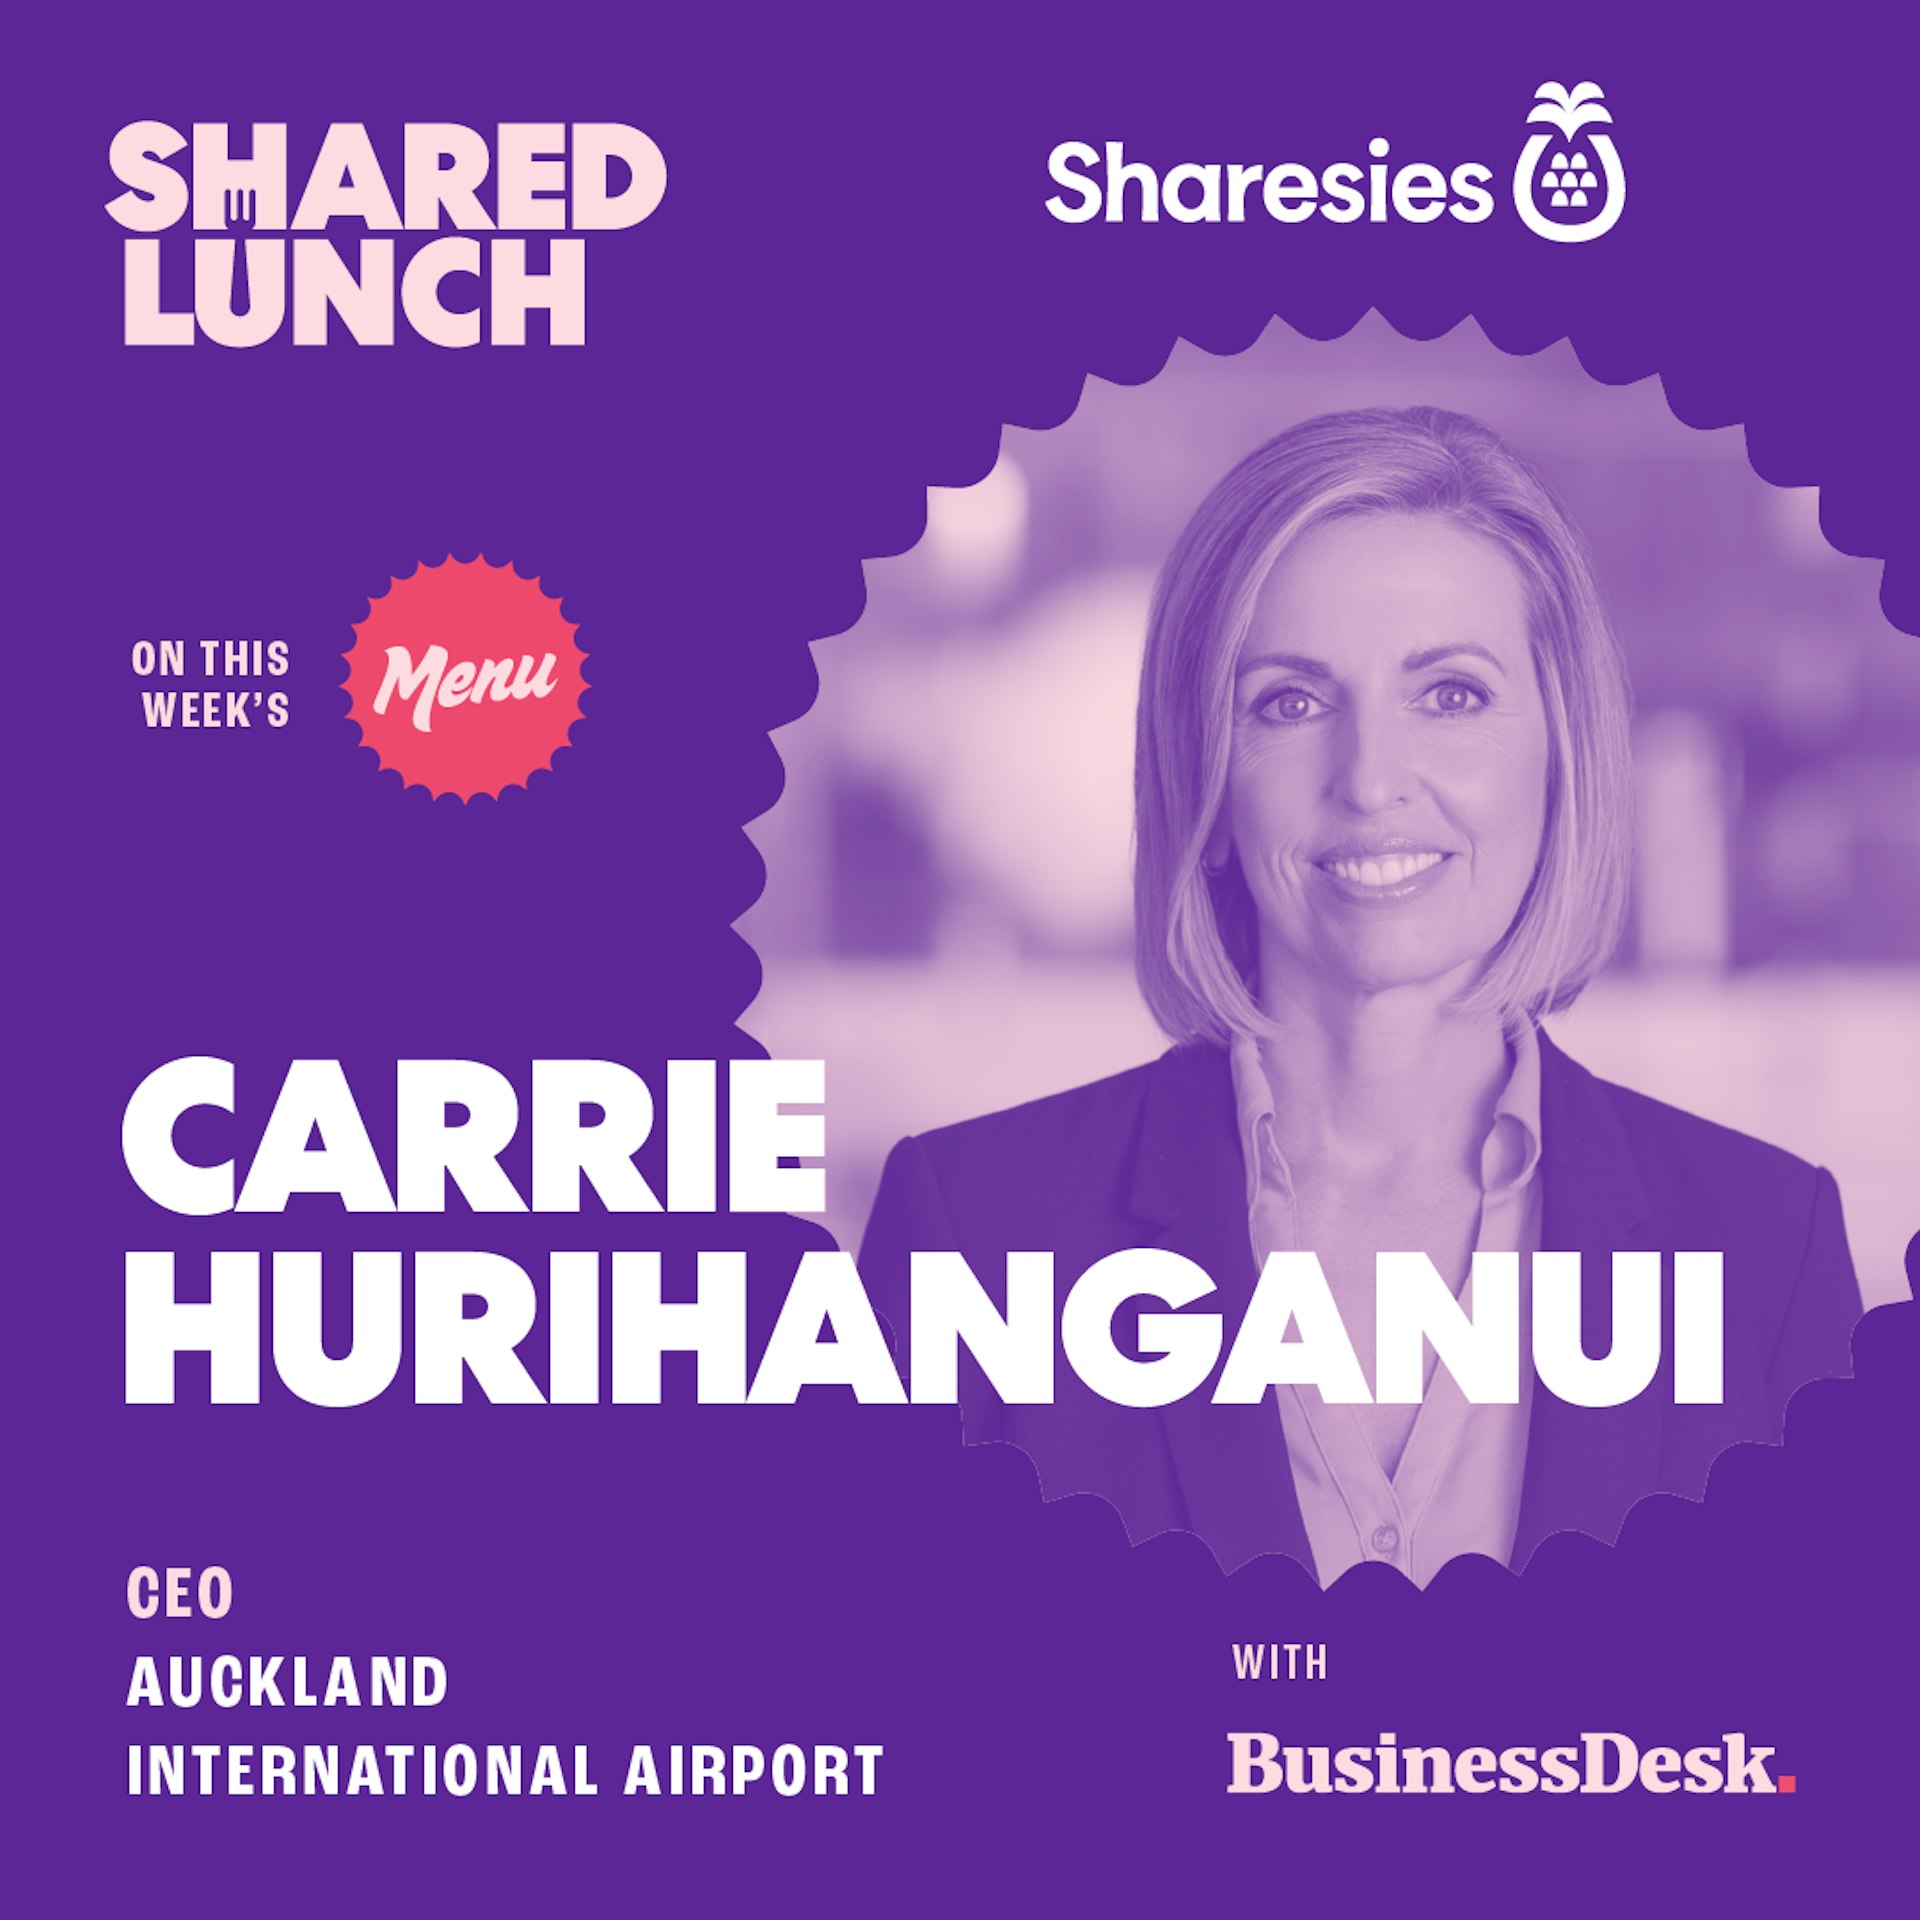 Shared Lunch with Auckland International Airport CEO Carrie Hurihanganui